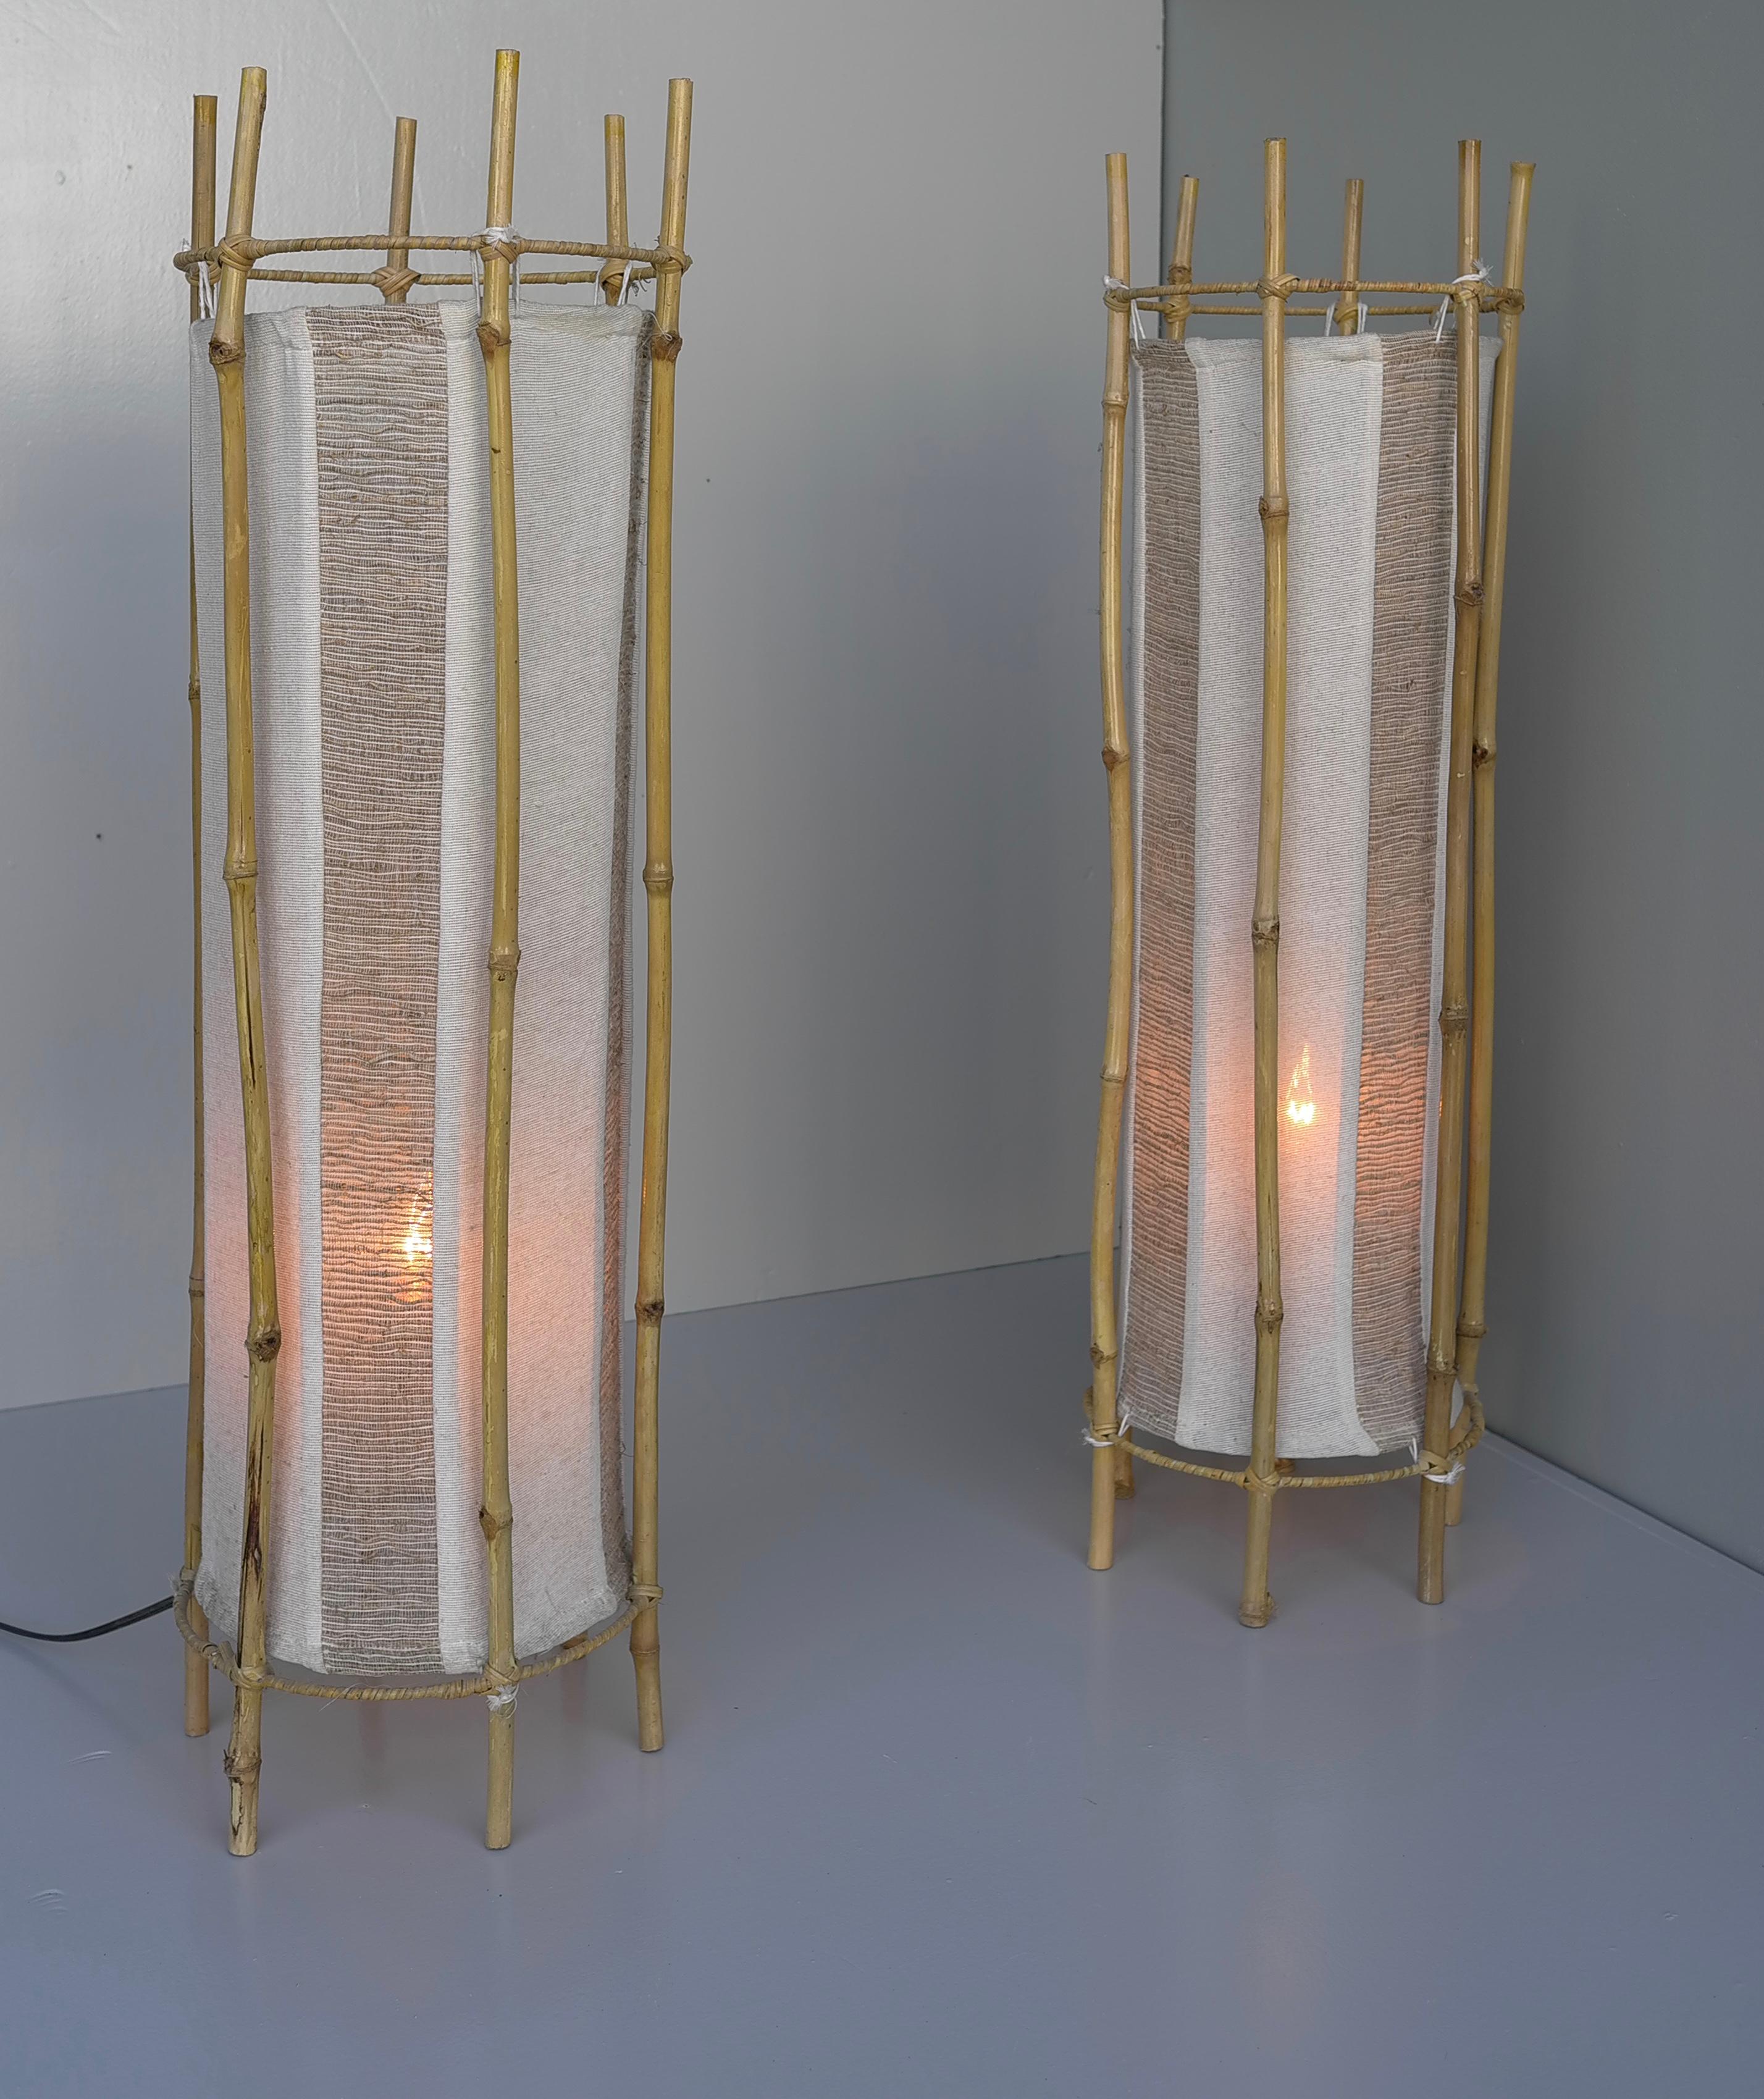 These lamps dates from the period Sognot was concerned with more humble and affordable materials in response to material shortages after the World War II. It is hand crafted from six bamboo sticks encasing a cylindrical cotton canvas and wicker